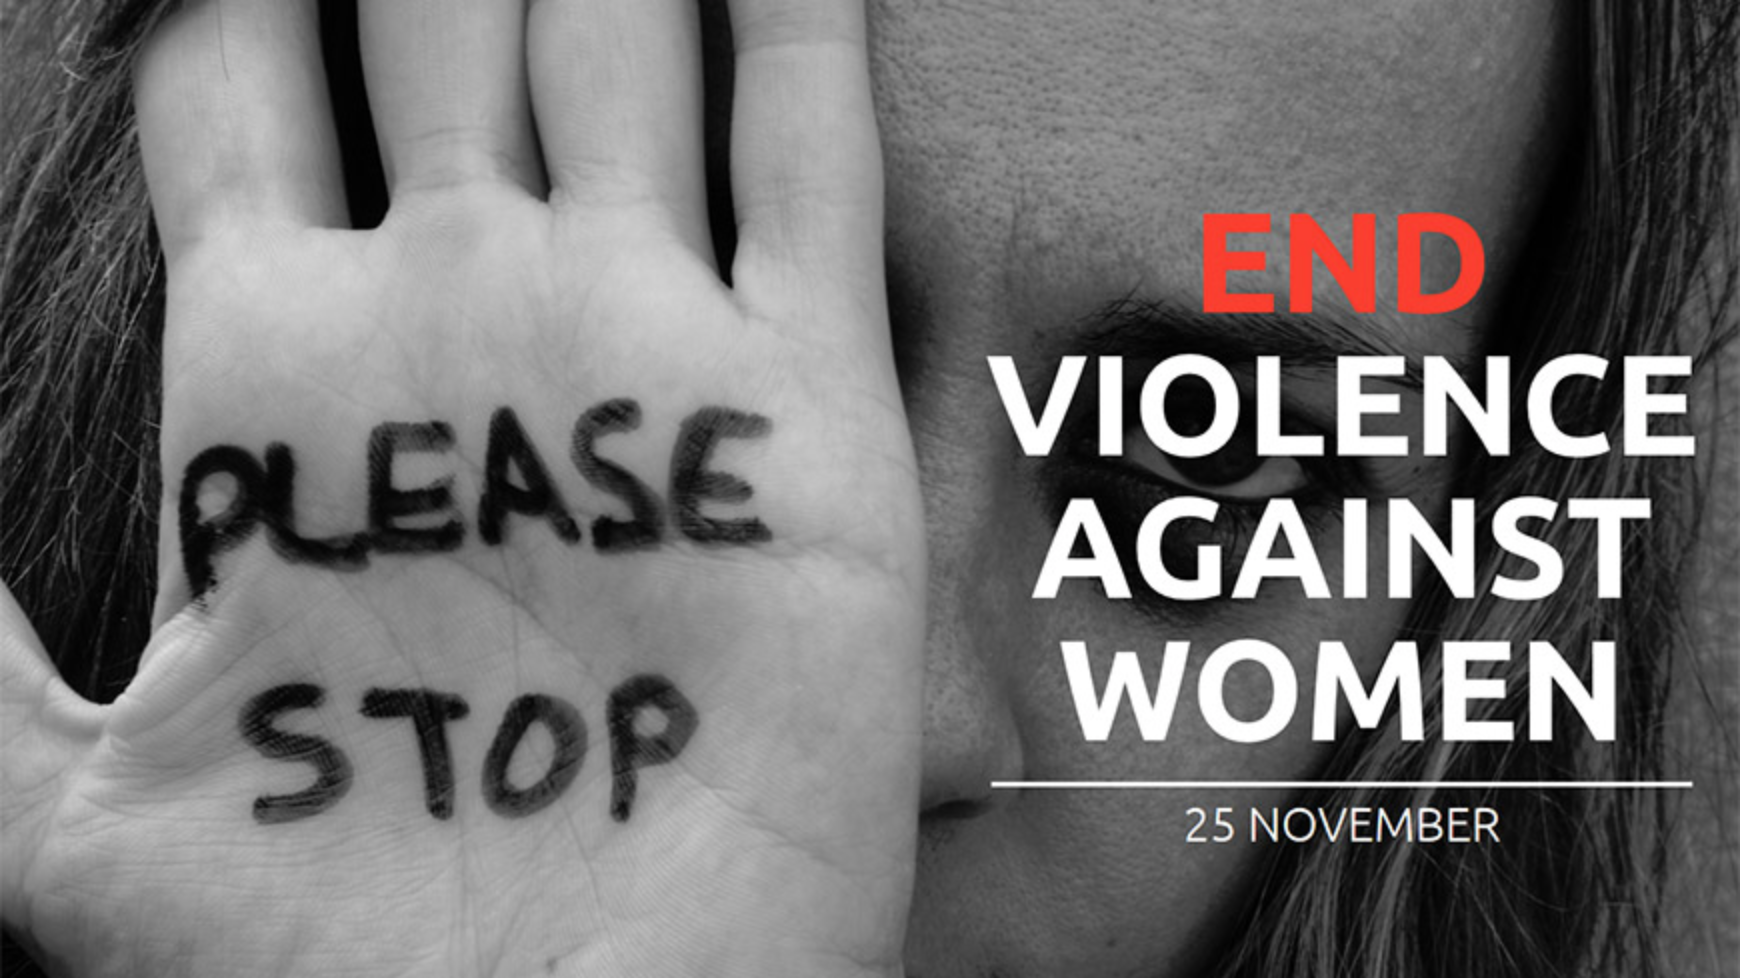 Ending violence against women is good for everyone!